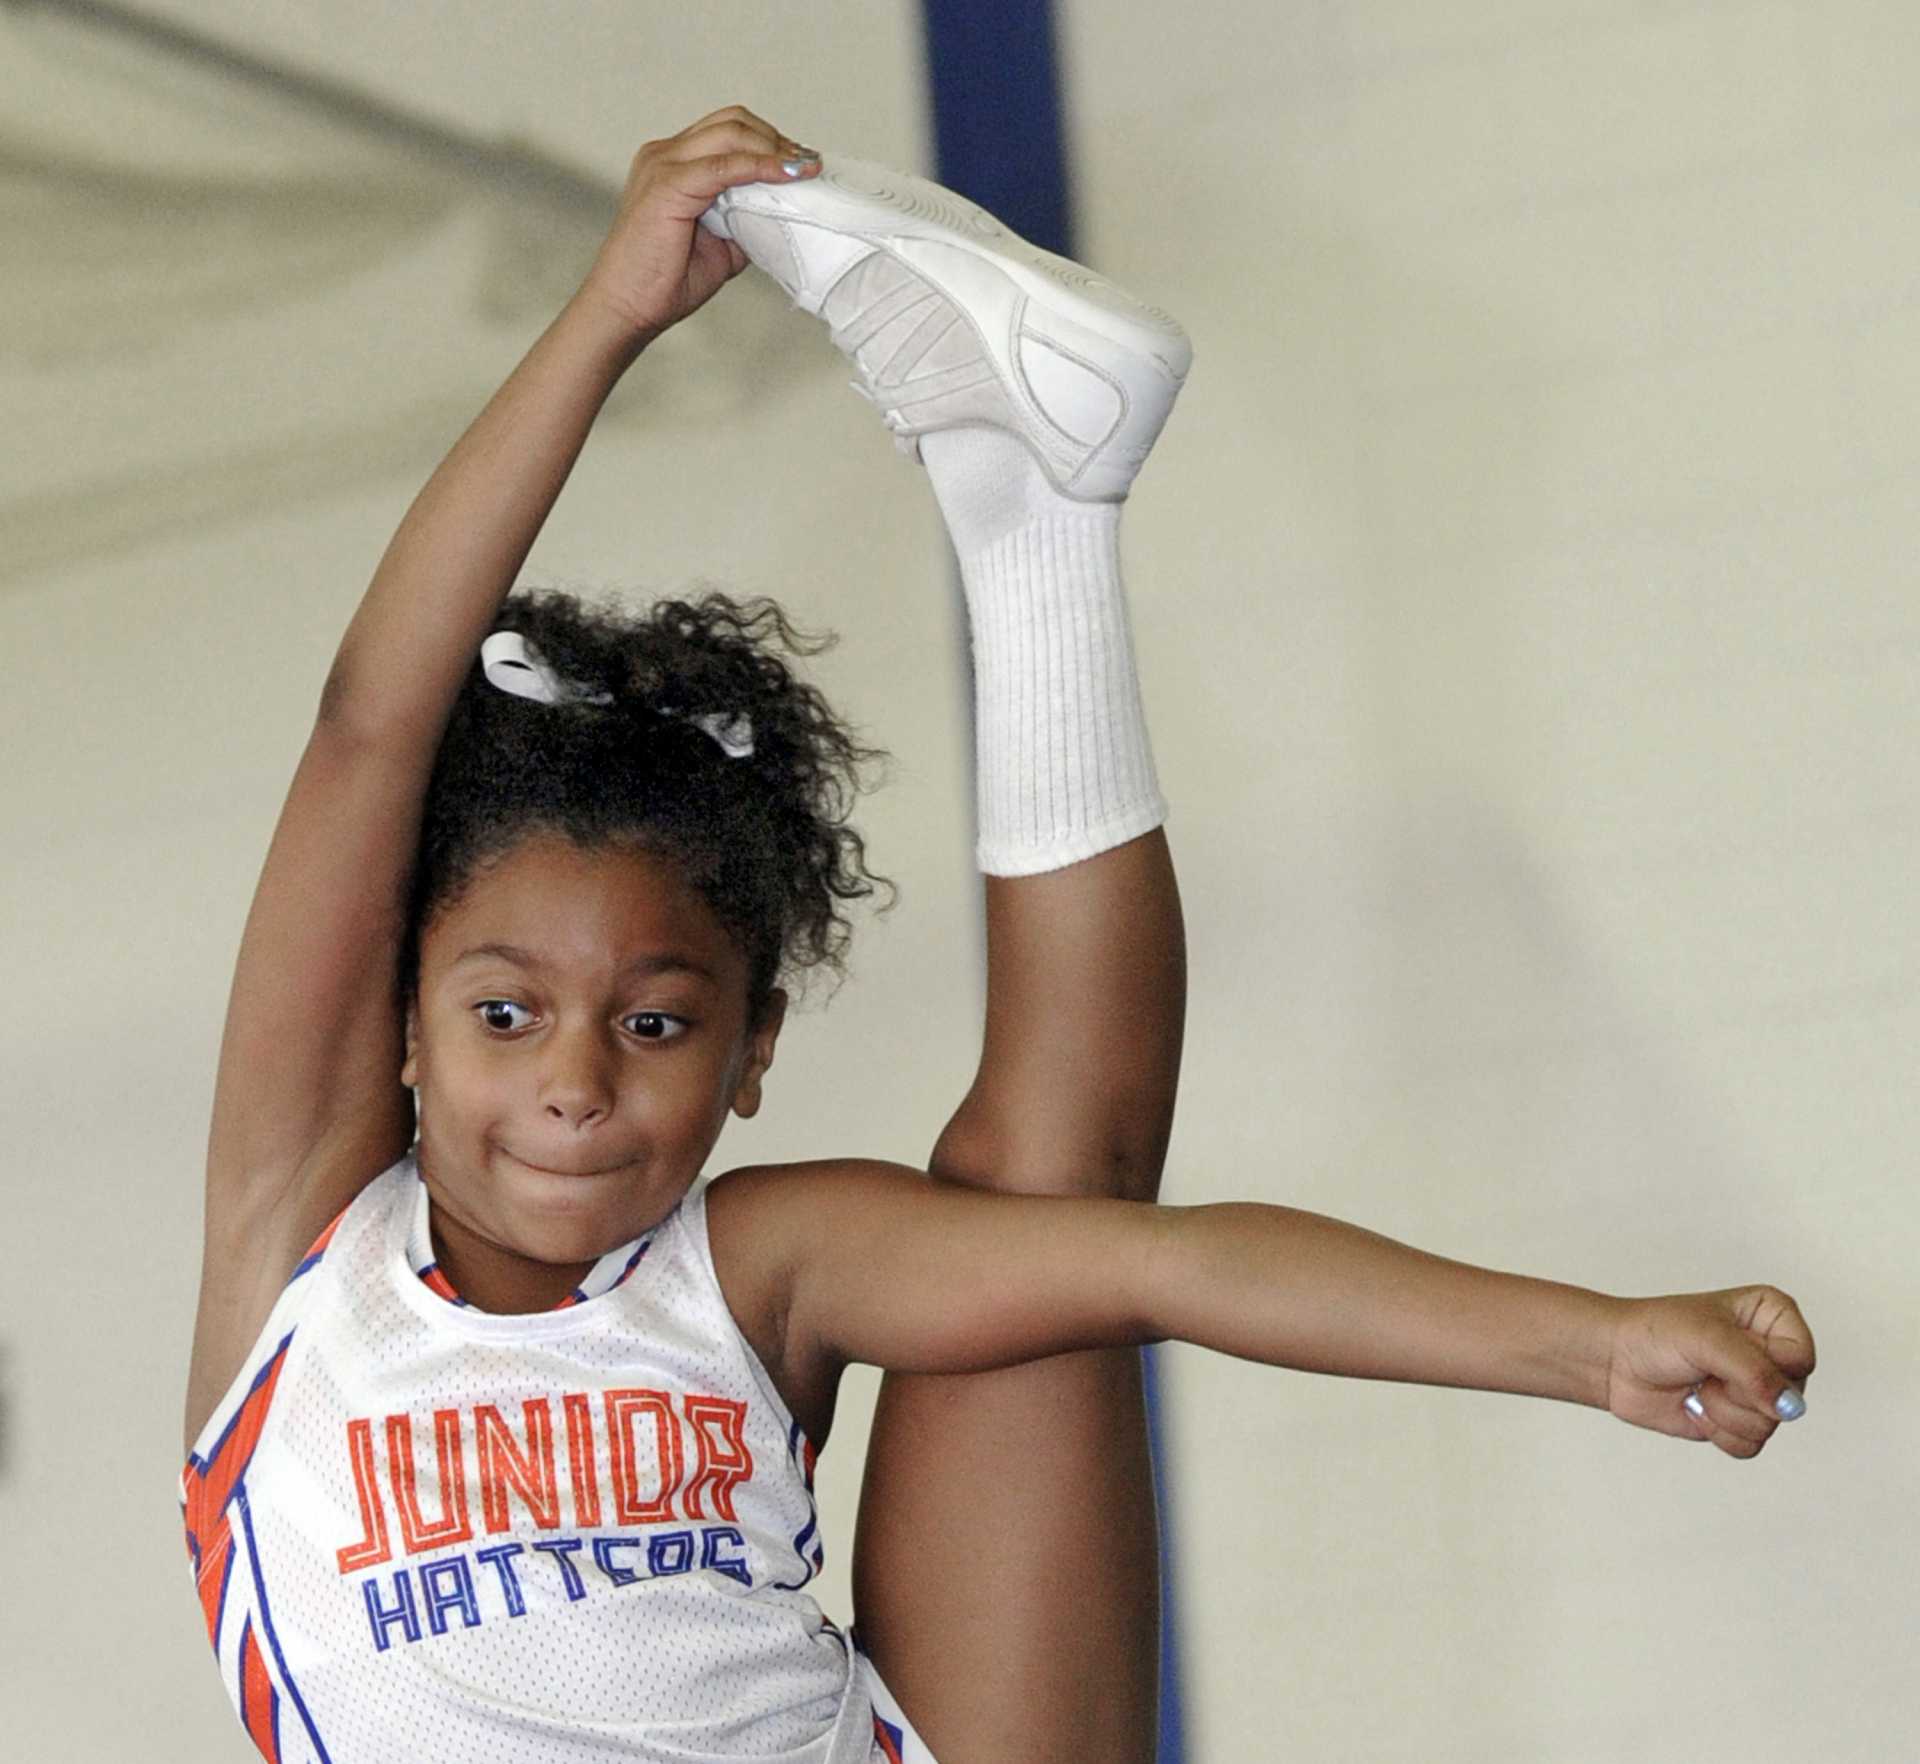 Displaying extreme flexibility, Ella Brown, 8, of Danbury, a flier for the Danbury Junior Hatters cheerleaders, practices a ''needle''.